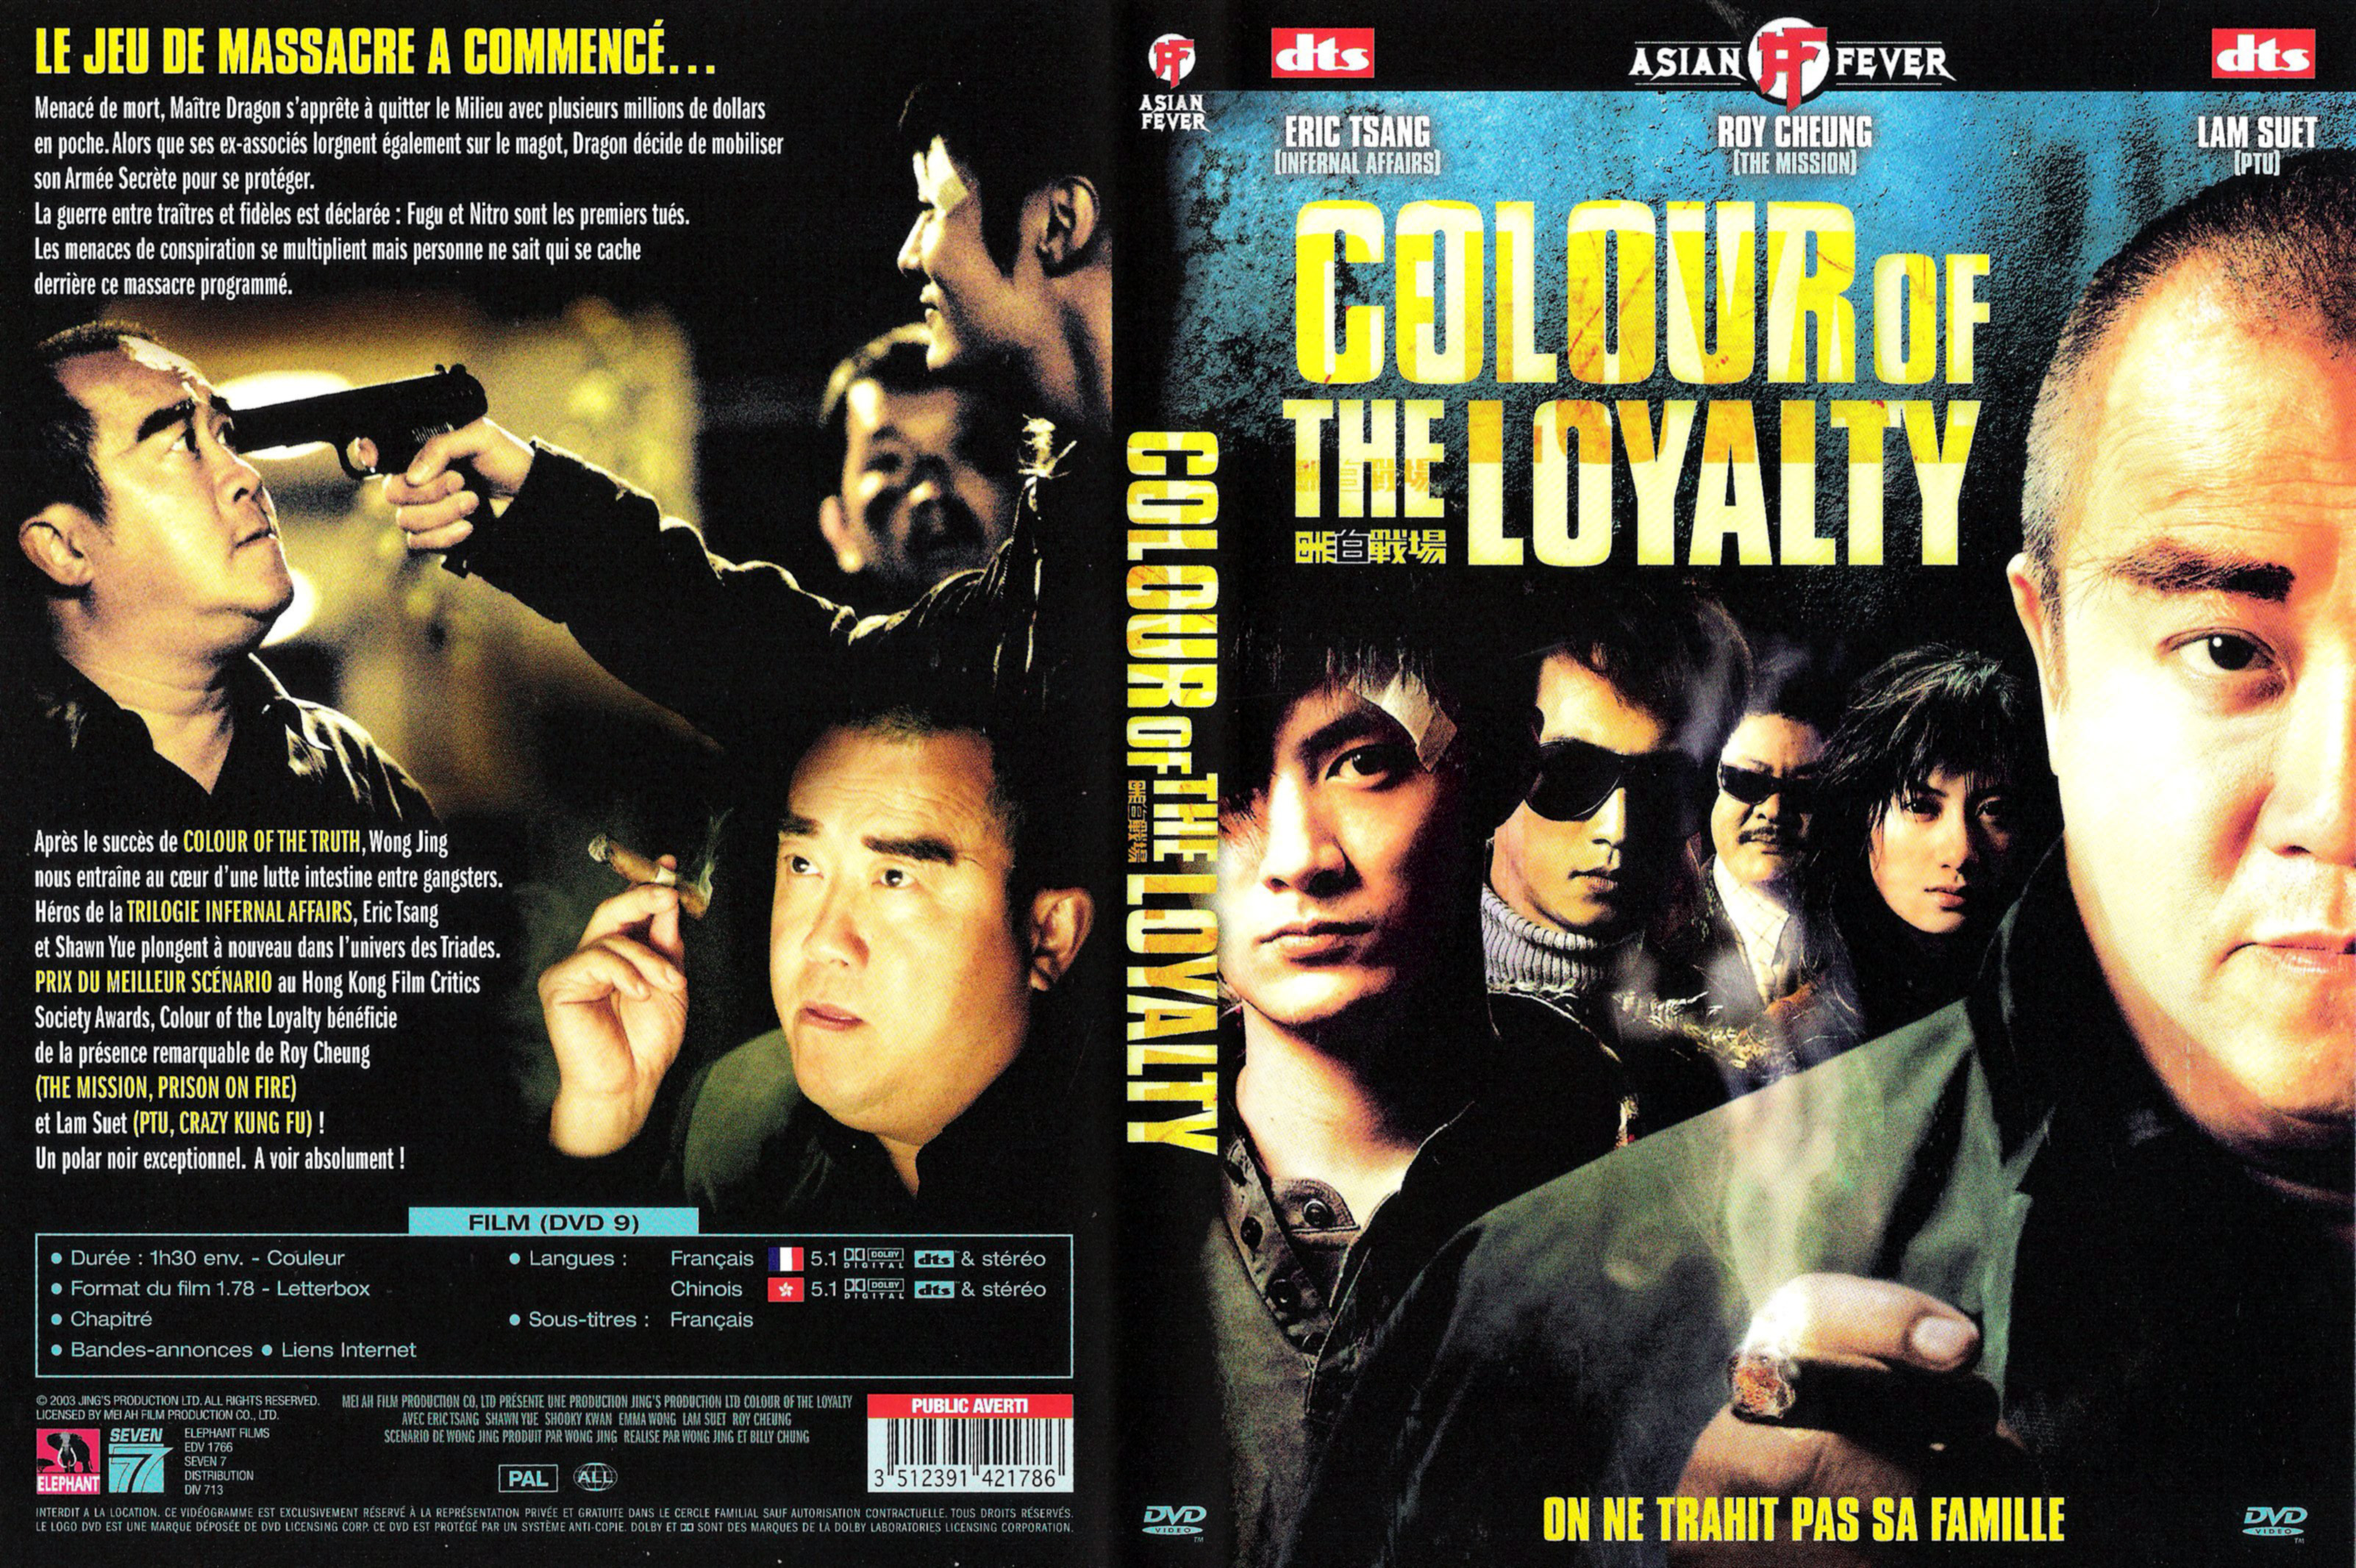 Jaquette DVD Colour of the loyalty